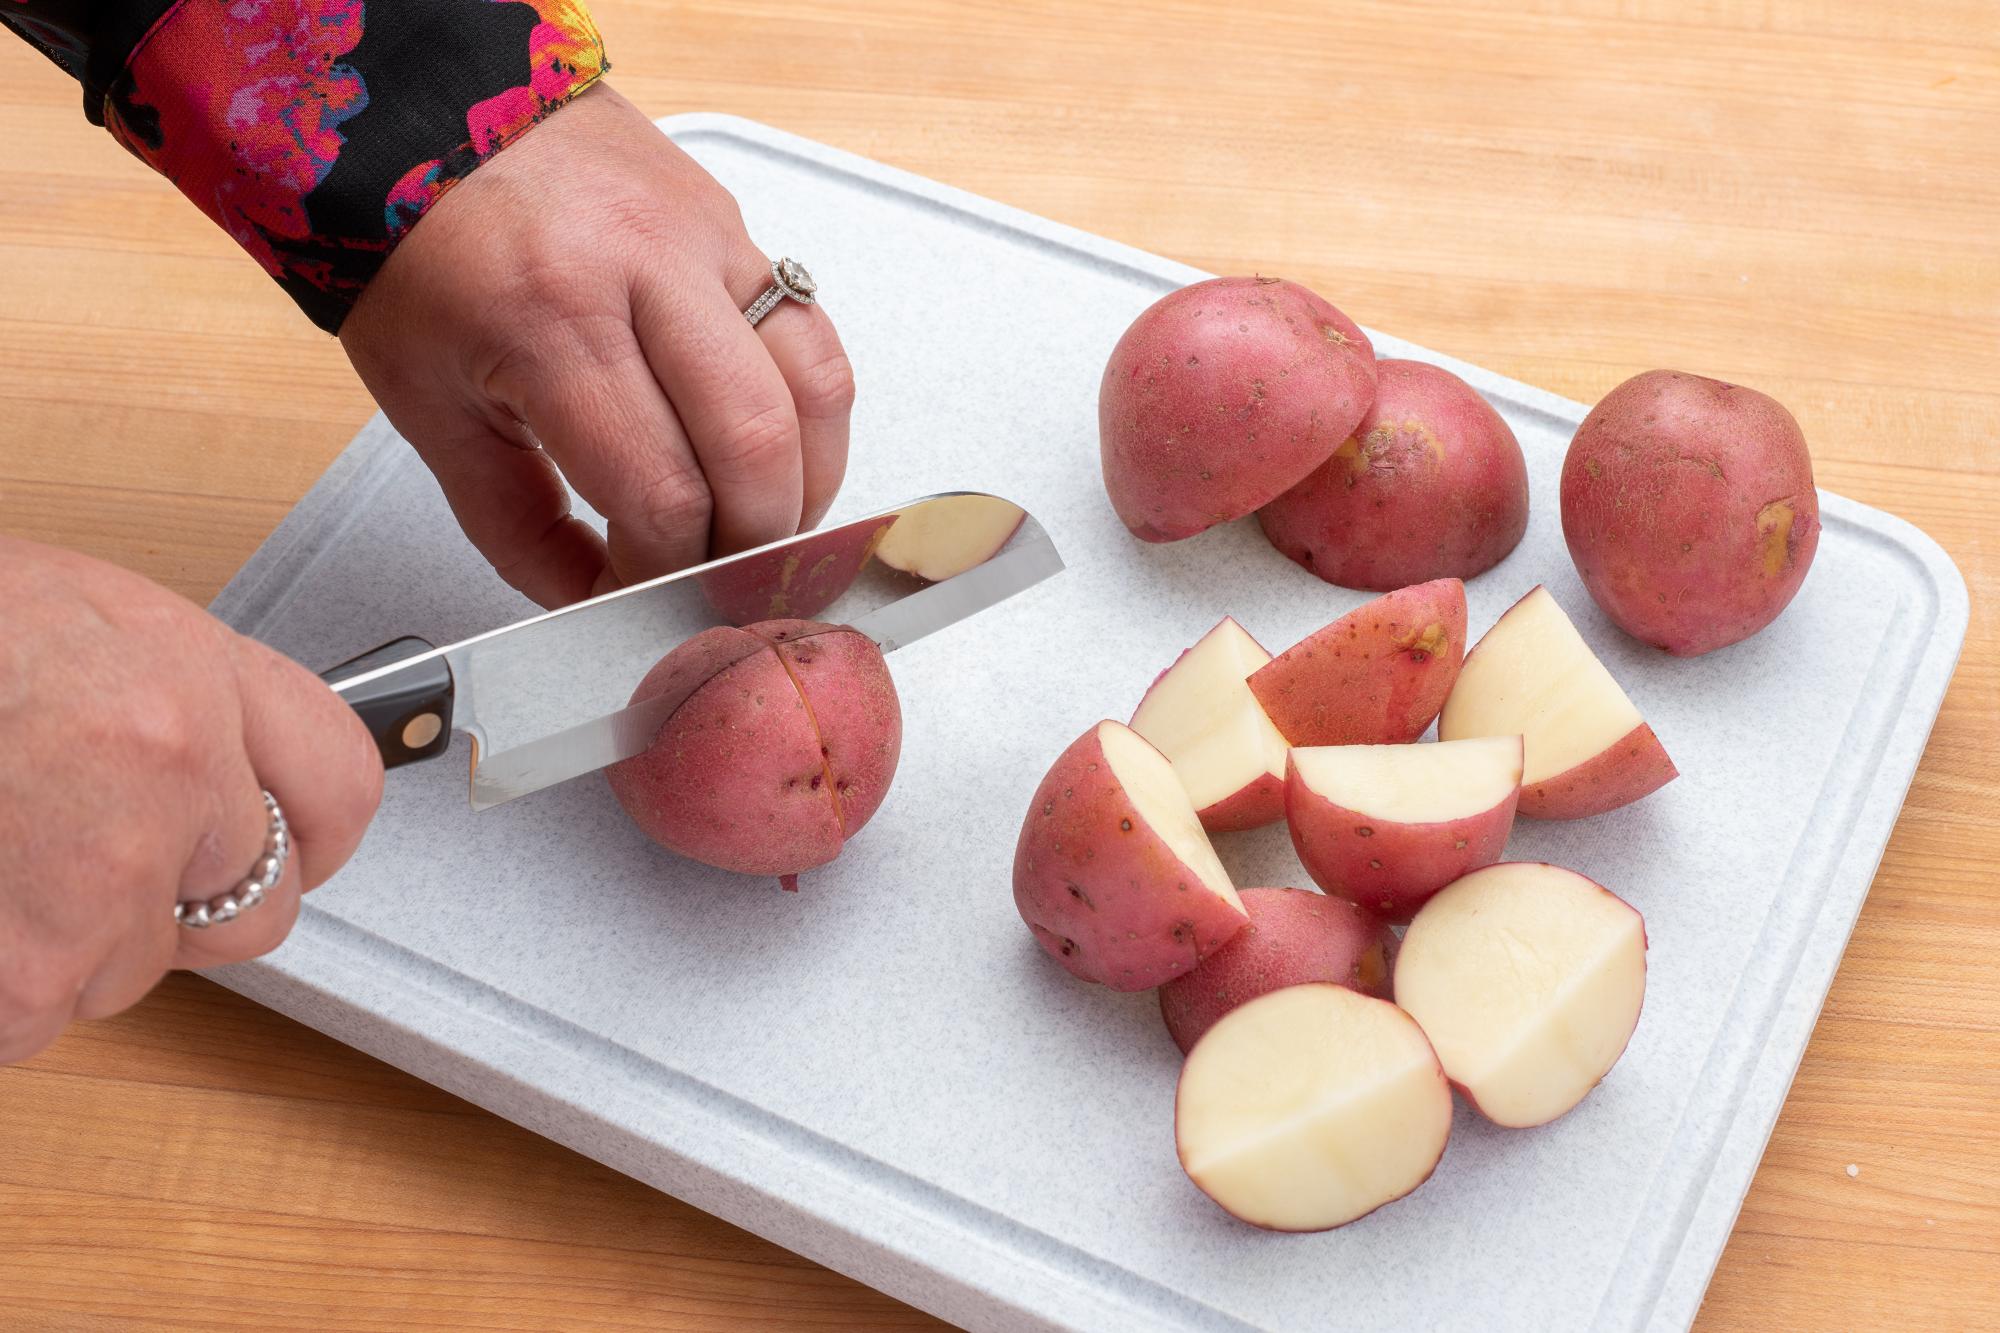 Cutting the red potatoes with a Petite Santoku